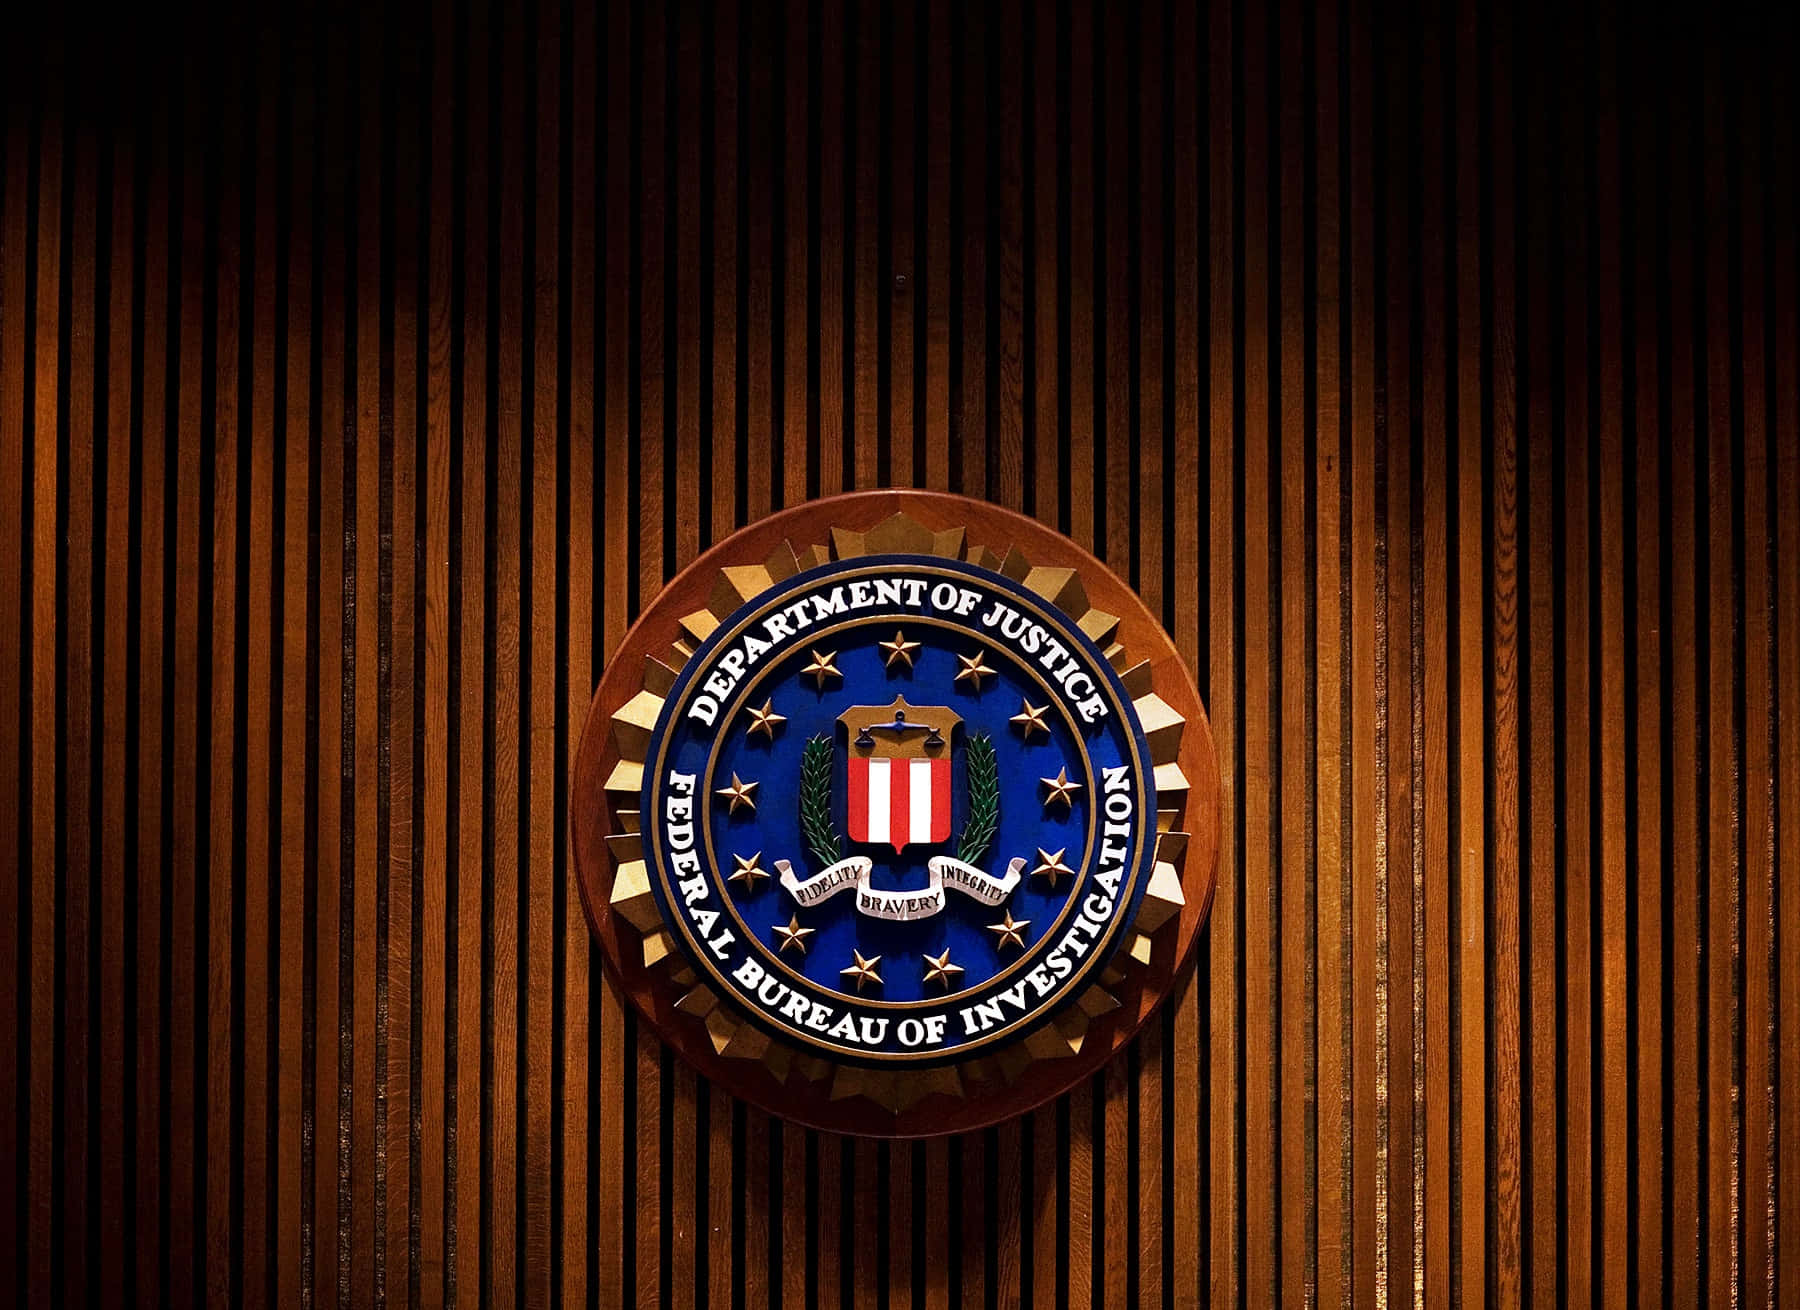 The Fbi Logo Is On A Wooden Wall Background